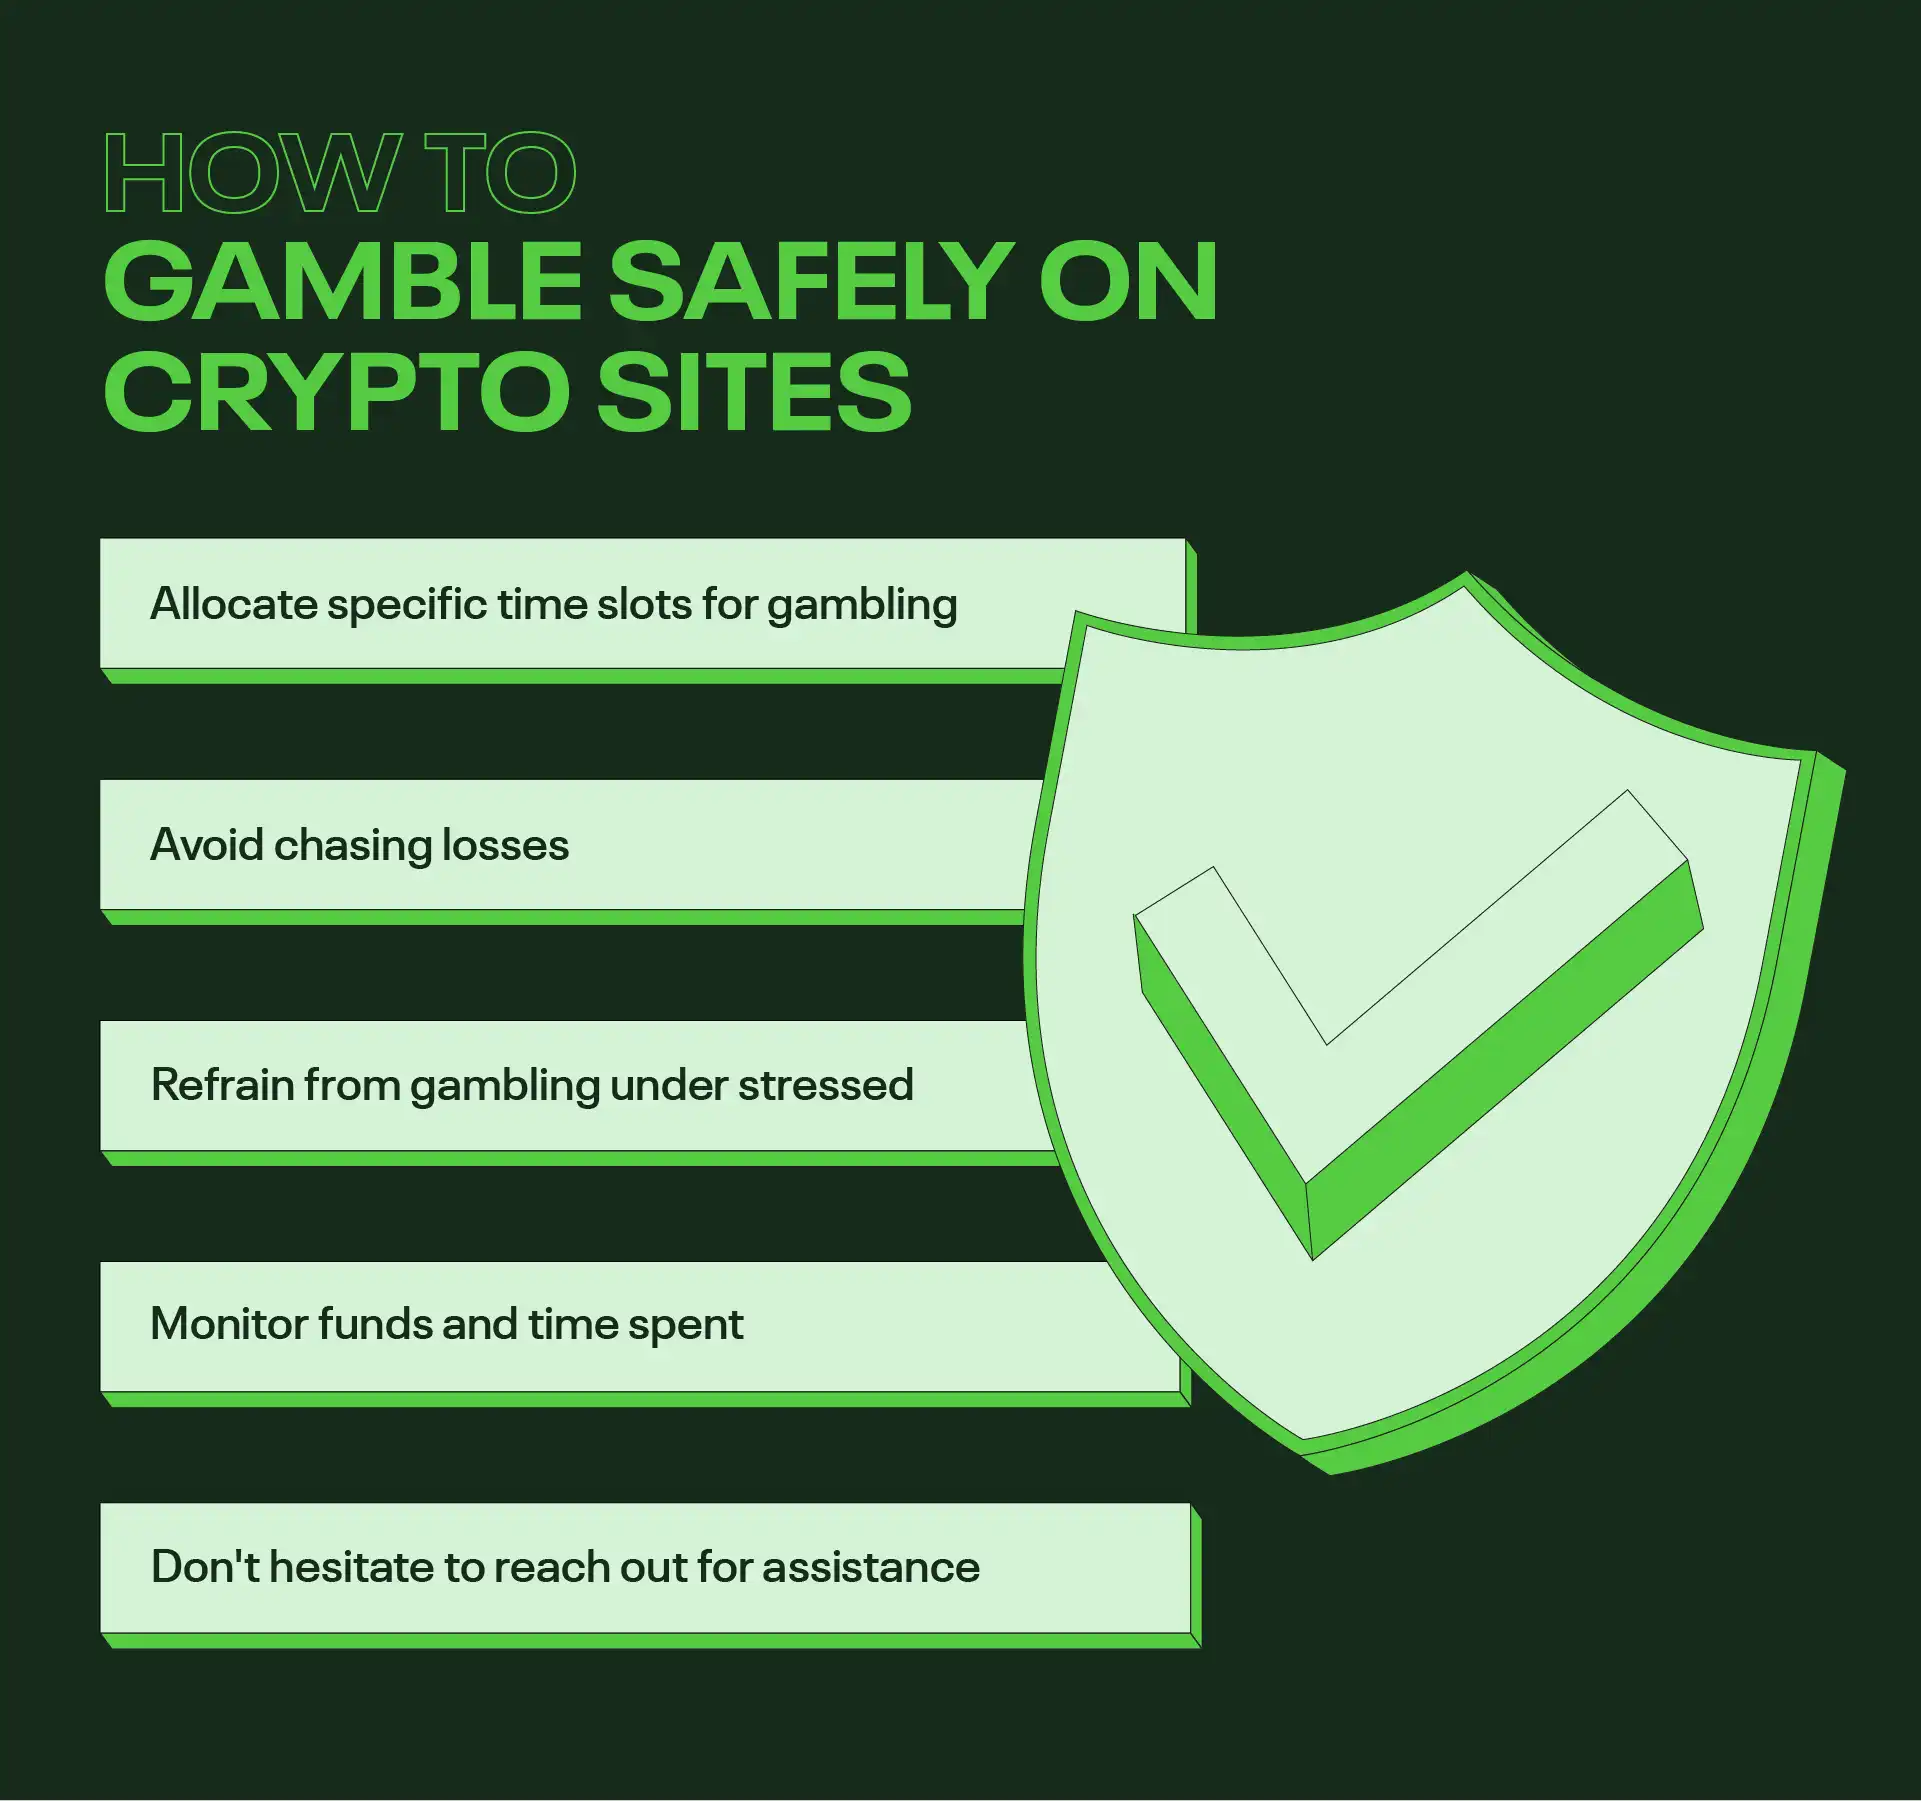 How to gamble safely on crypto gambling sites